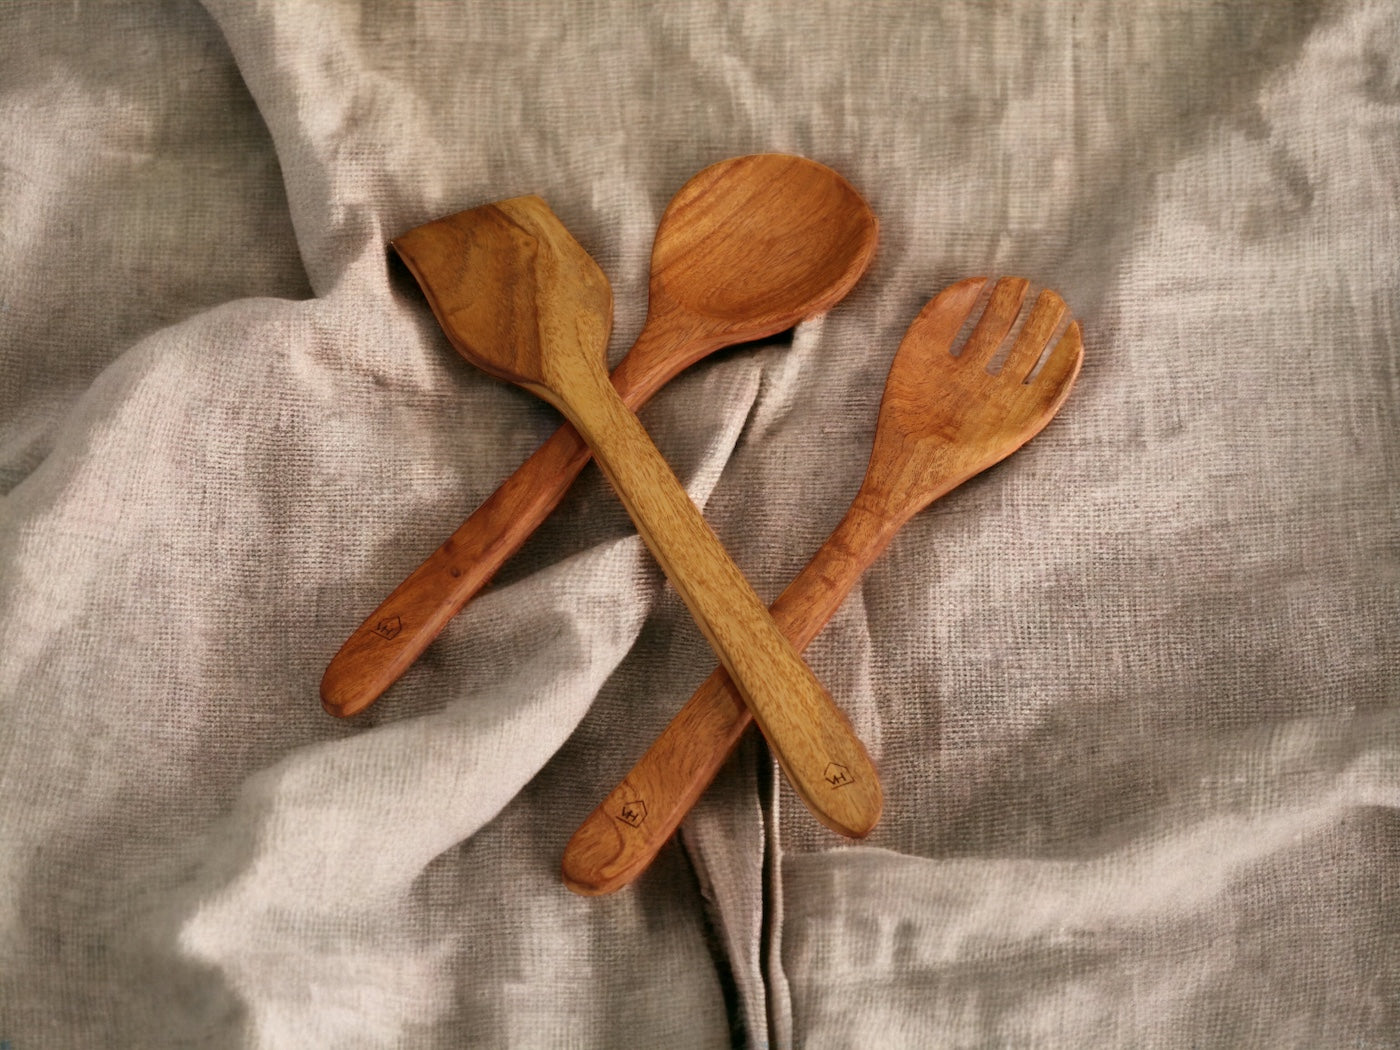 Neem Wood Kitchen Cooking Spoons Set of 3